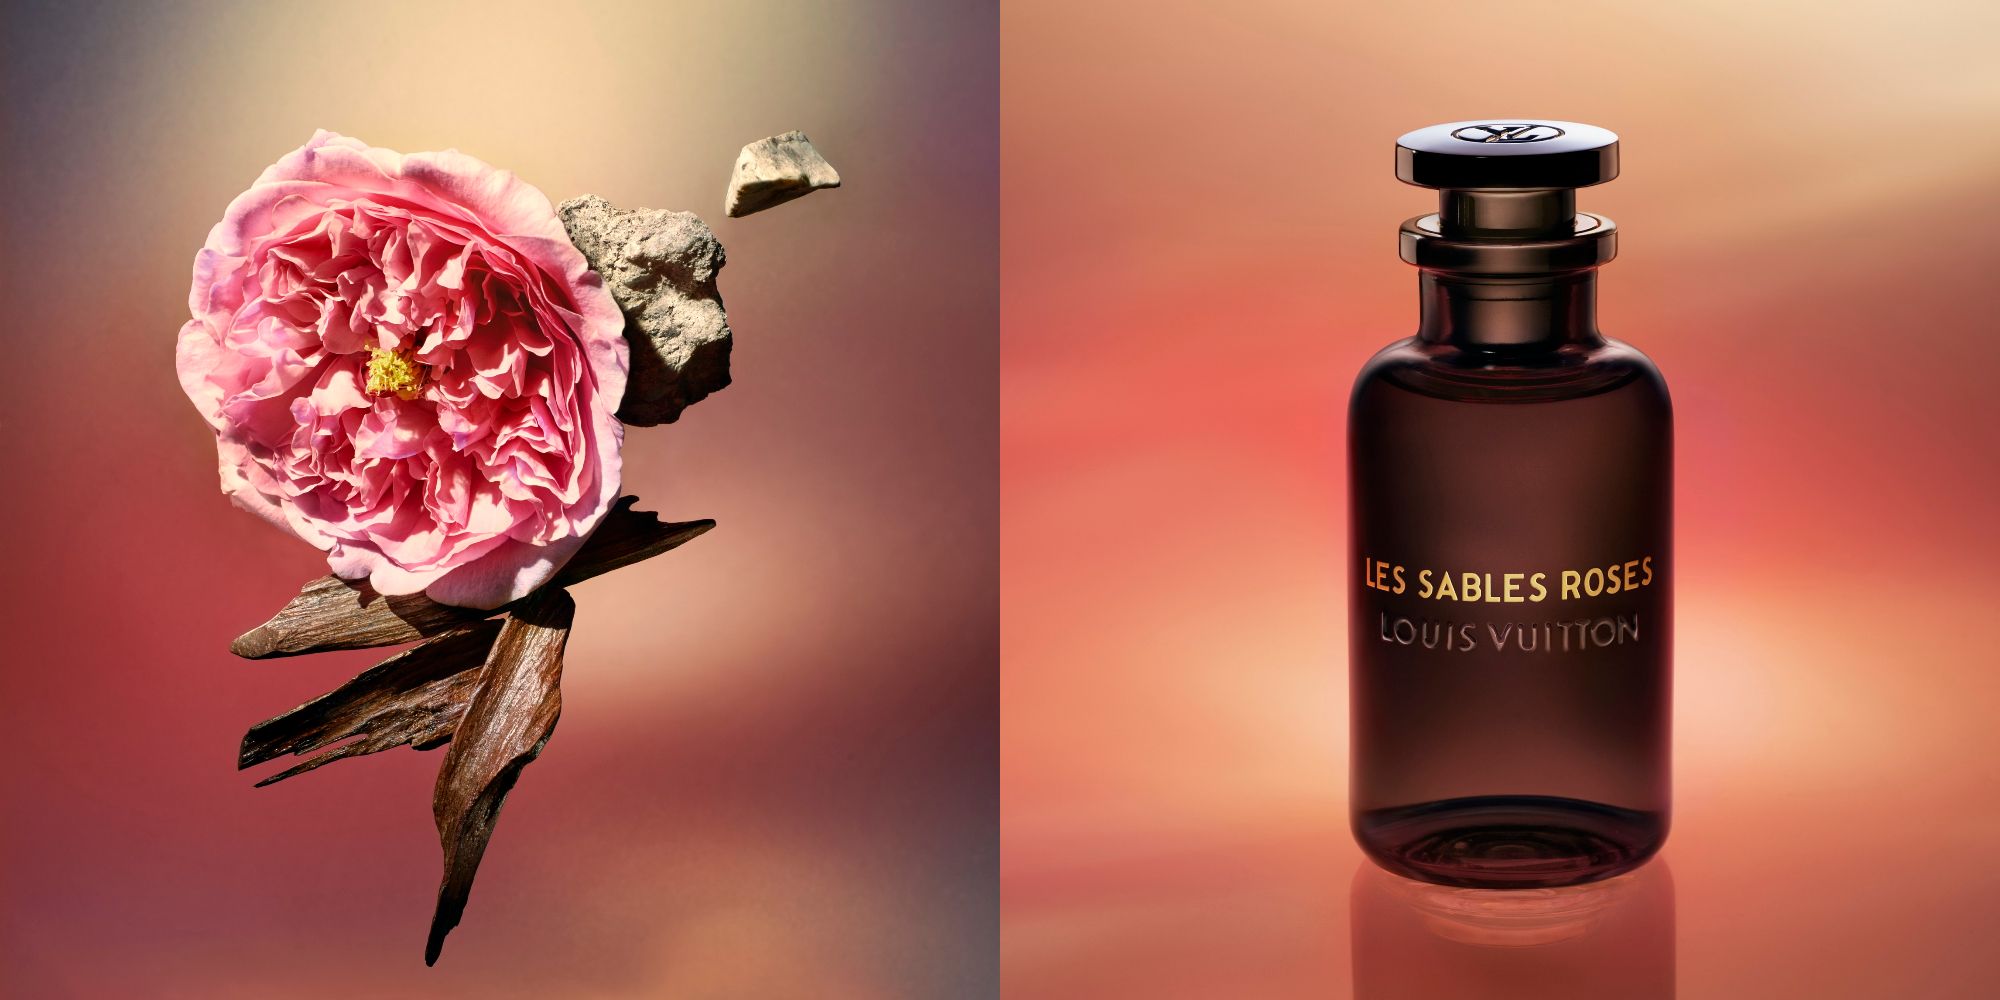 LES ROSES (Inspired By Les Sables Roses Louis Vuitton) – 6 scents